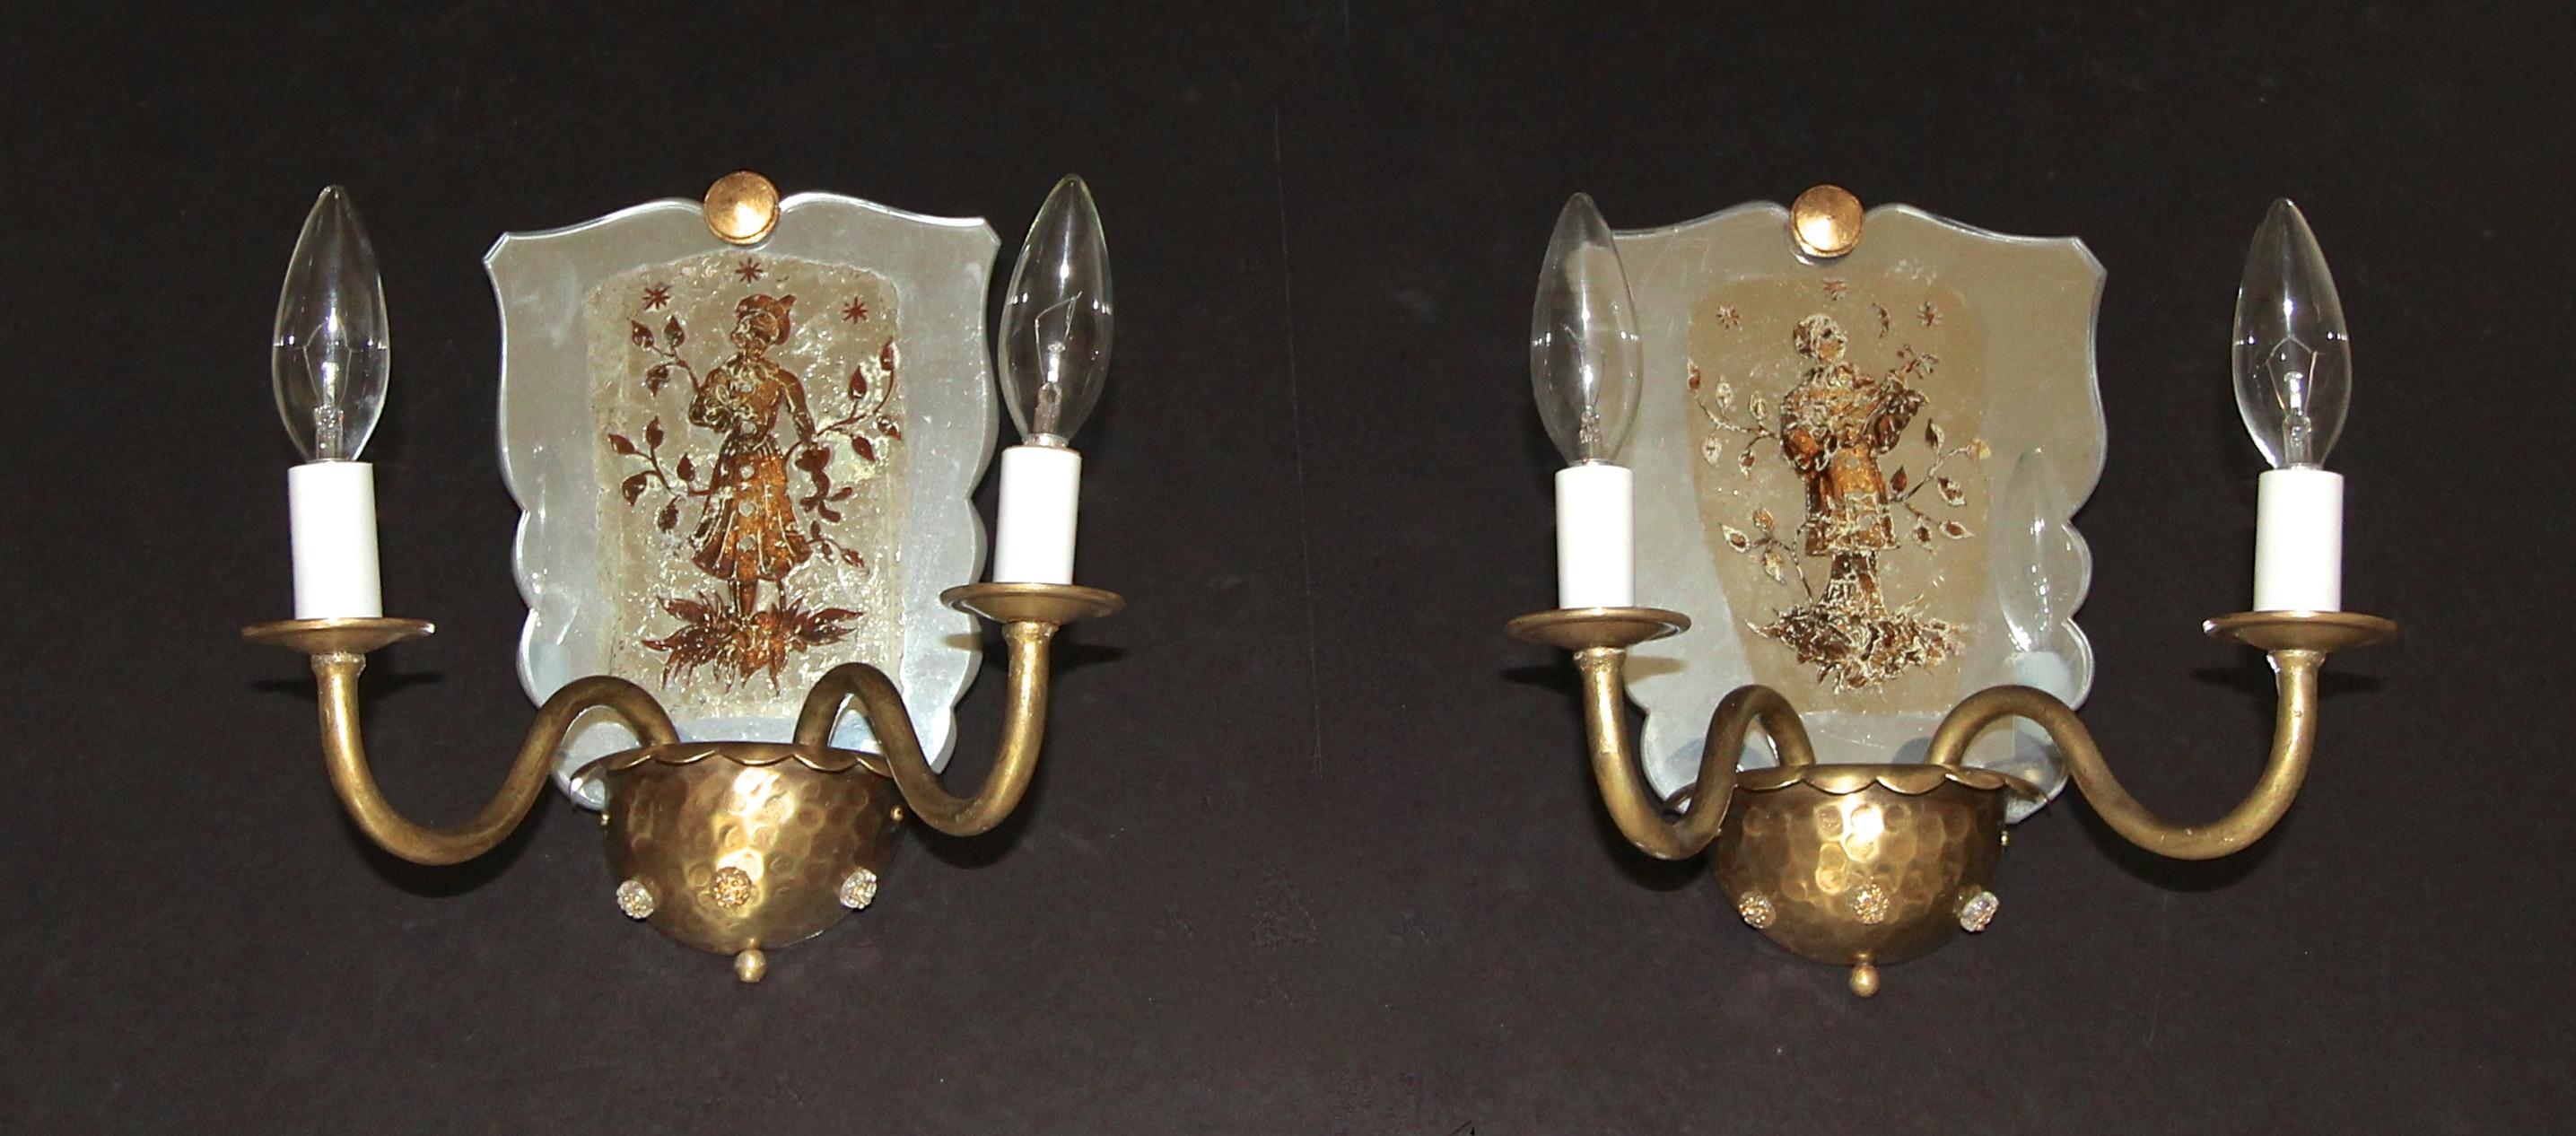 Glass Pair of Venetian Italian Mirrored Wall Light Sconces For Sale